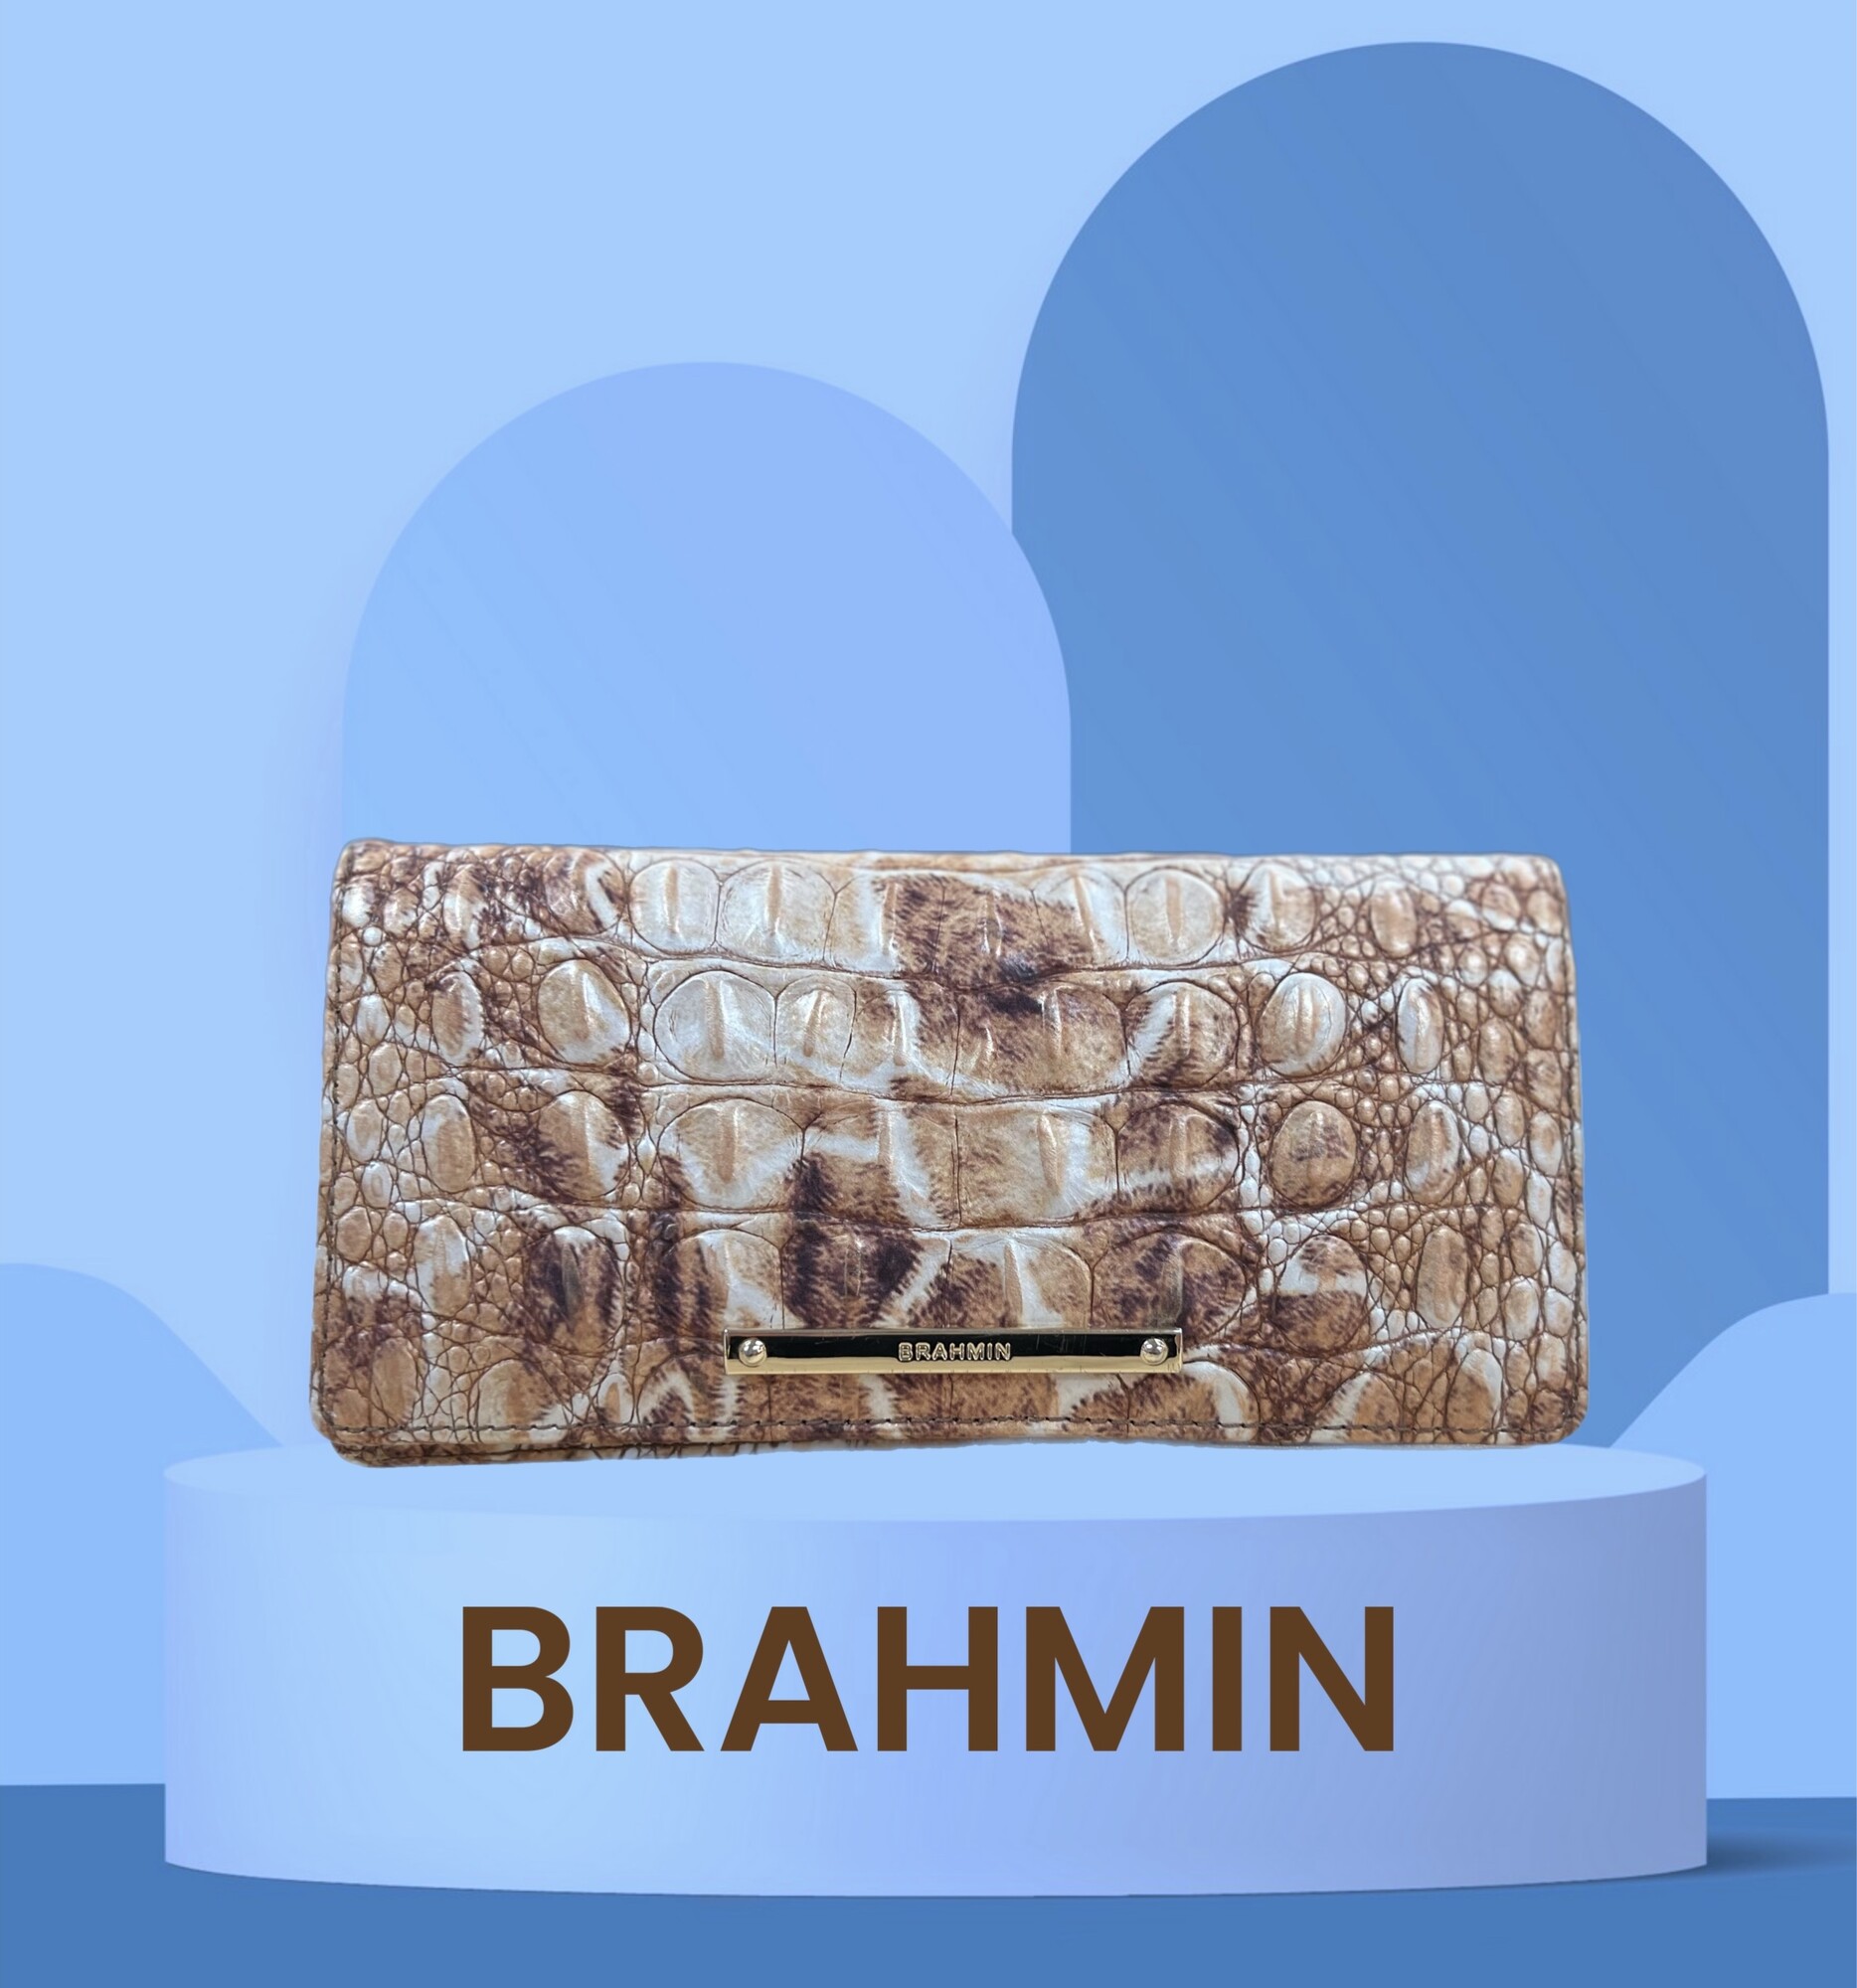 BRAHMIN
The Ady Wallet is exactly what you have been searching for. Super sleek and light weight with plenty of credit card slots and a zip pocket for your change. Extremely functional with its flat design, perfect for fitting in your favorite clutch or crossbody.
13 Credit Card Slots
1 ID Slot
7.5\" W 3.75\" H 0.5\" D
Retails: $145.00
This wallet is in like new condition.